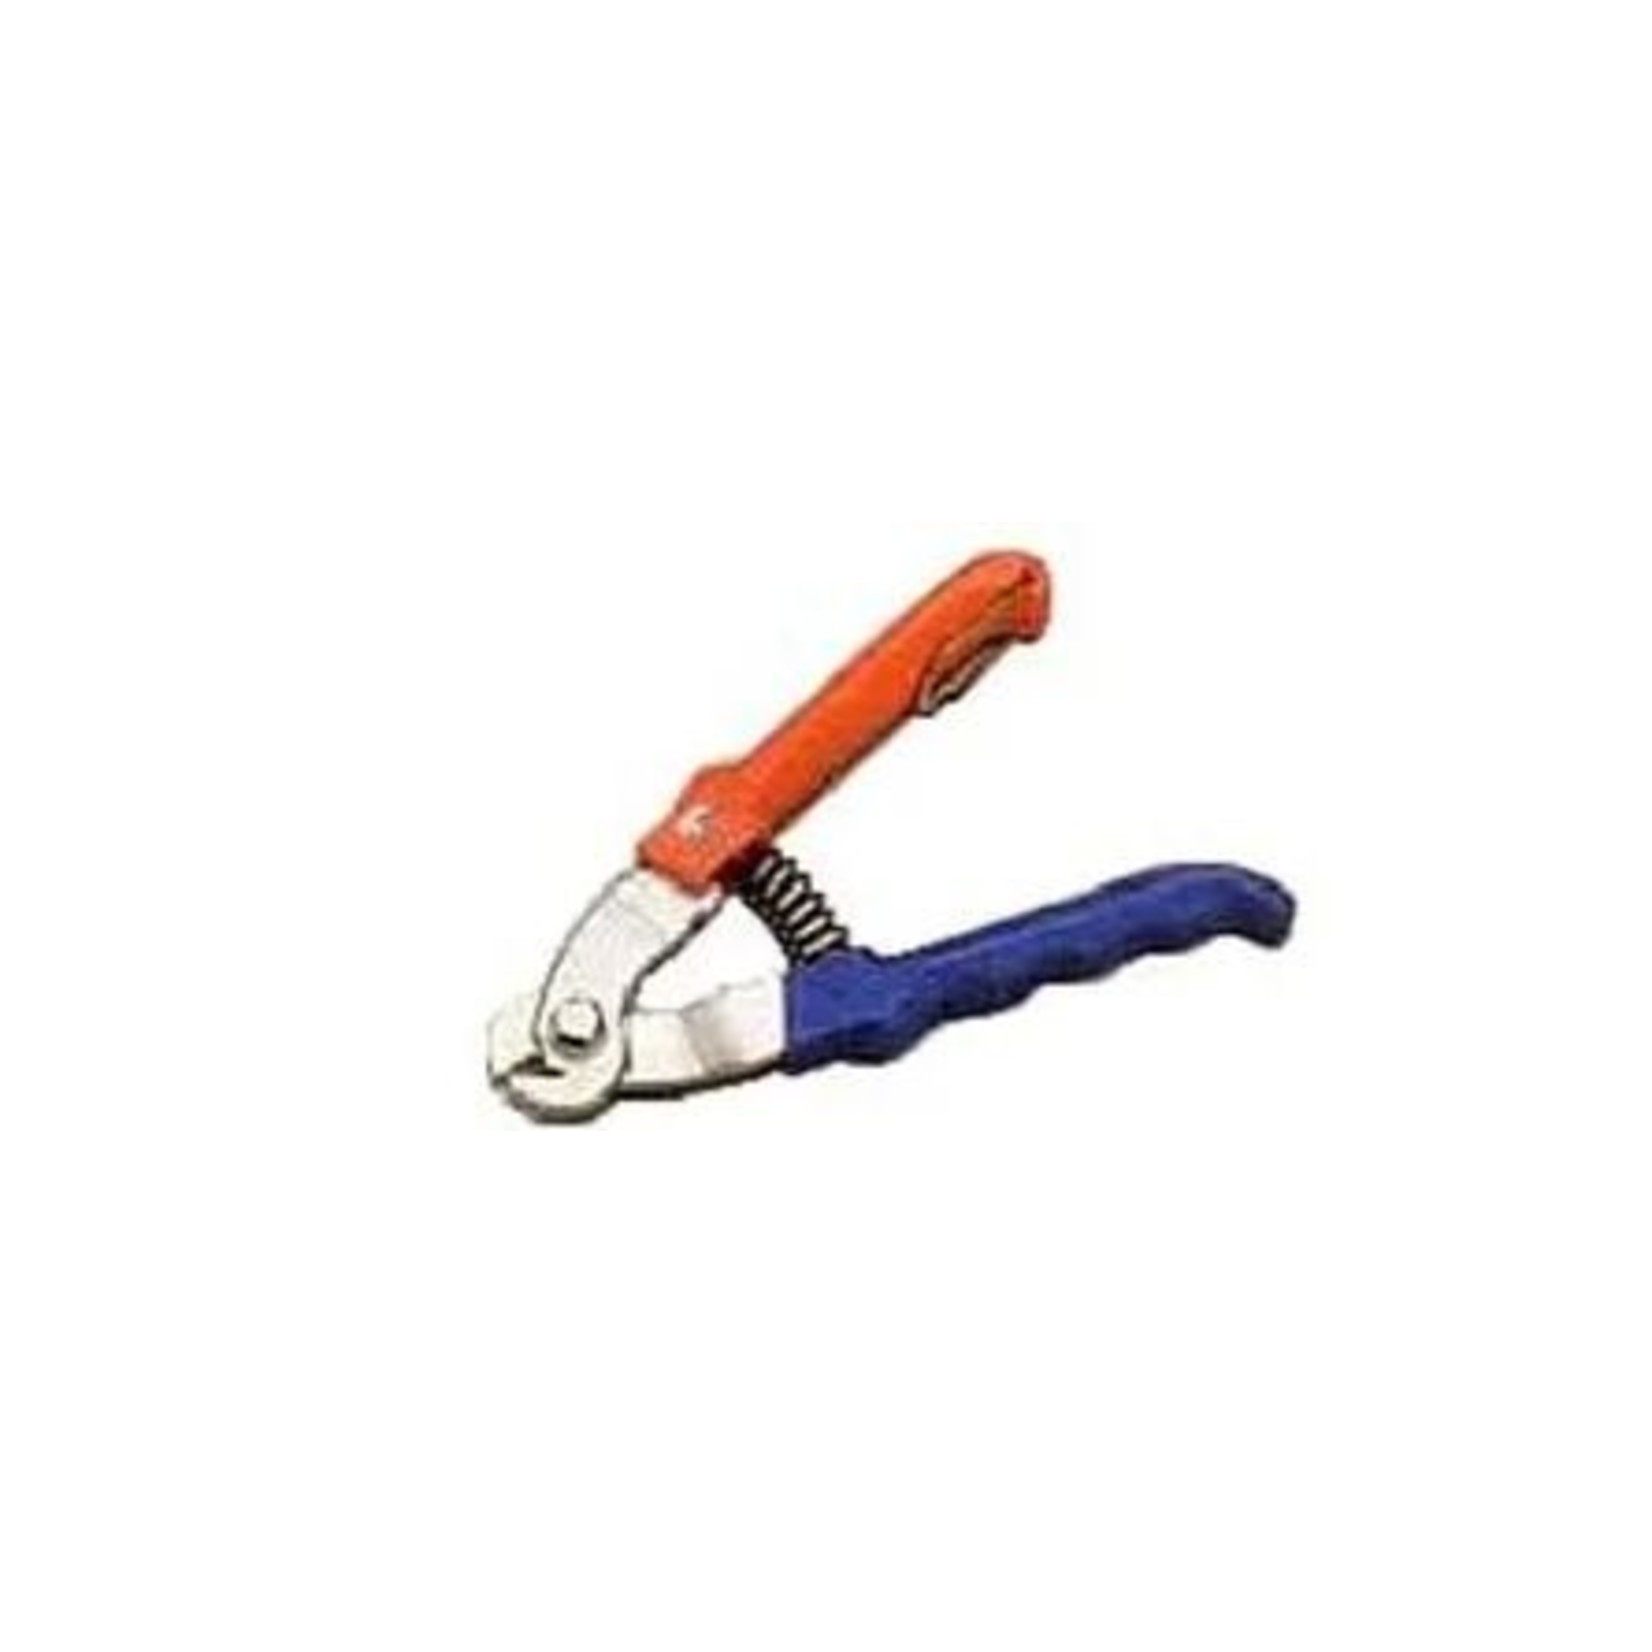 Pro Series Pro-Series - Bike/Cycling Tool - Cable Cutter Recommended For Cable SP Casing